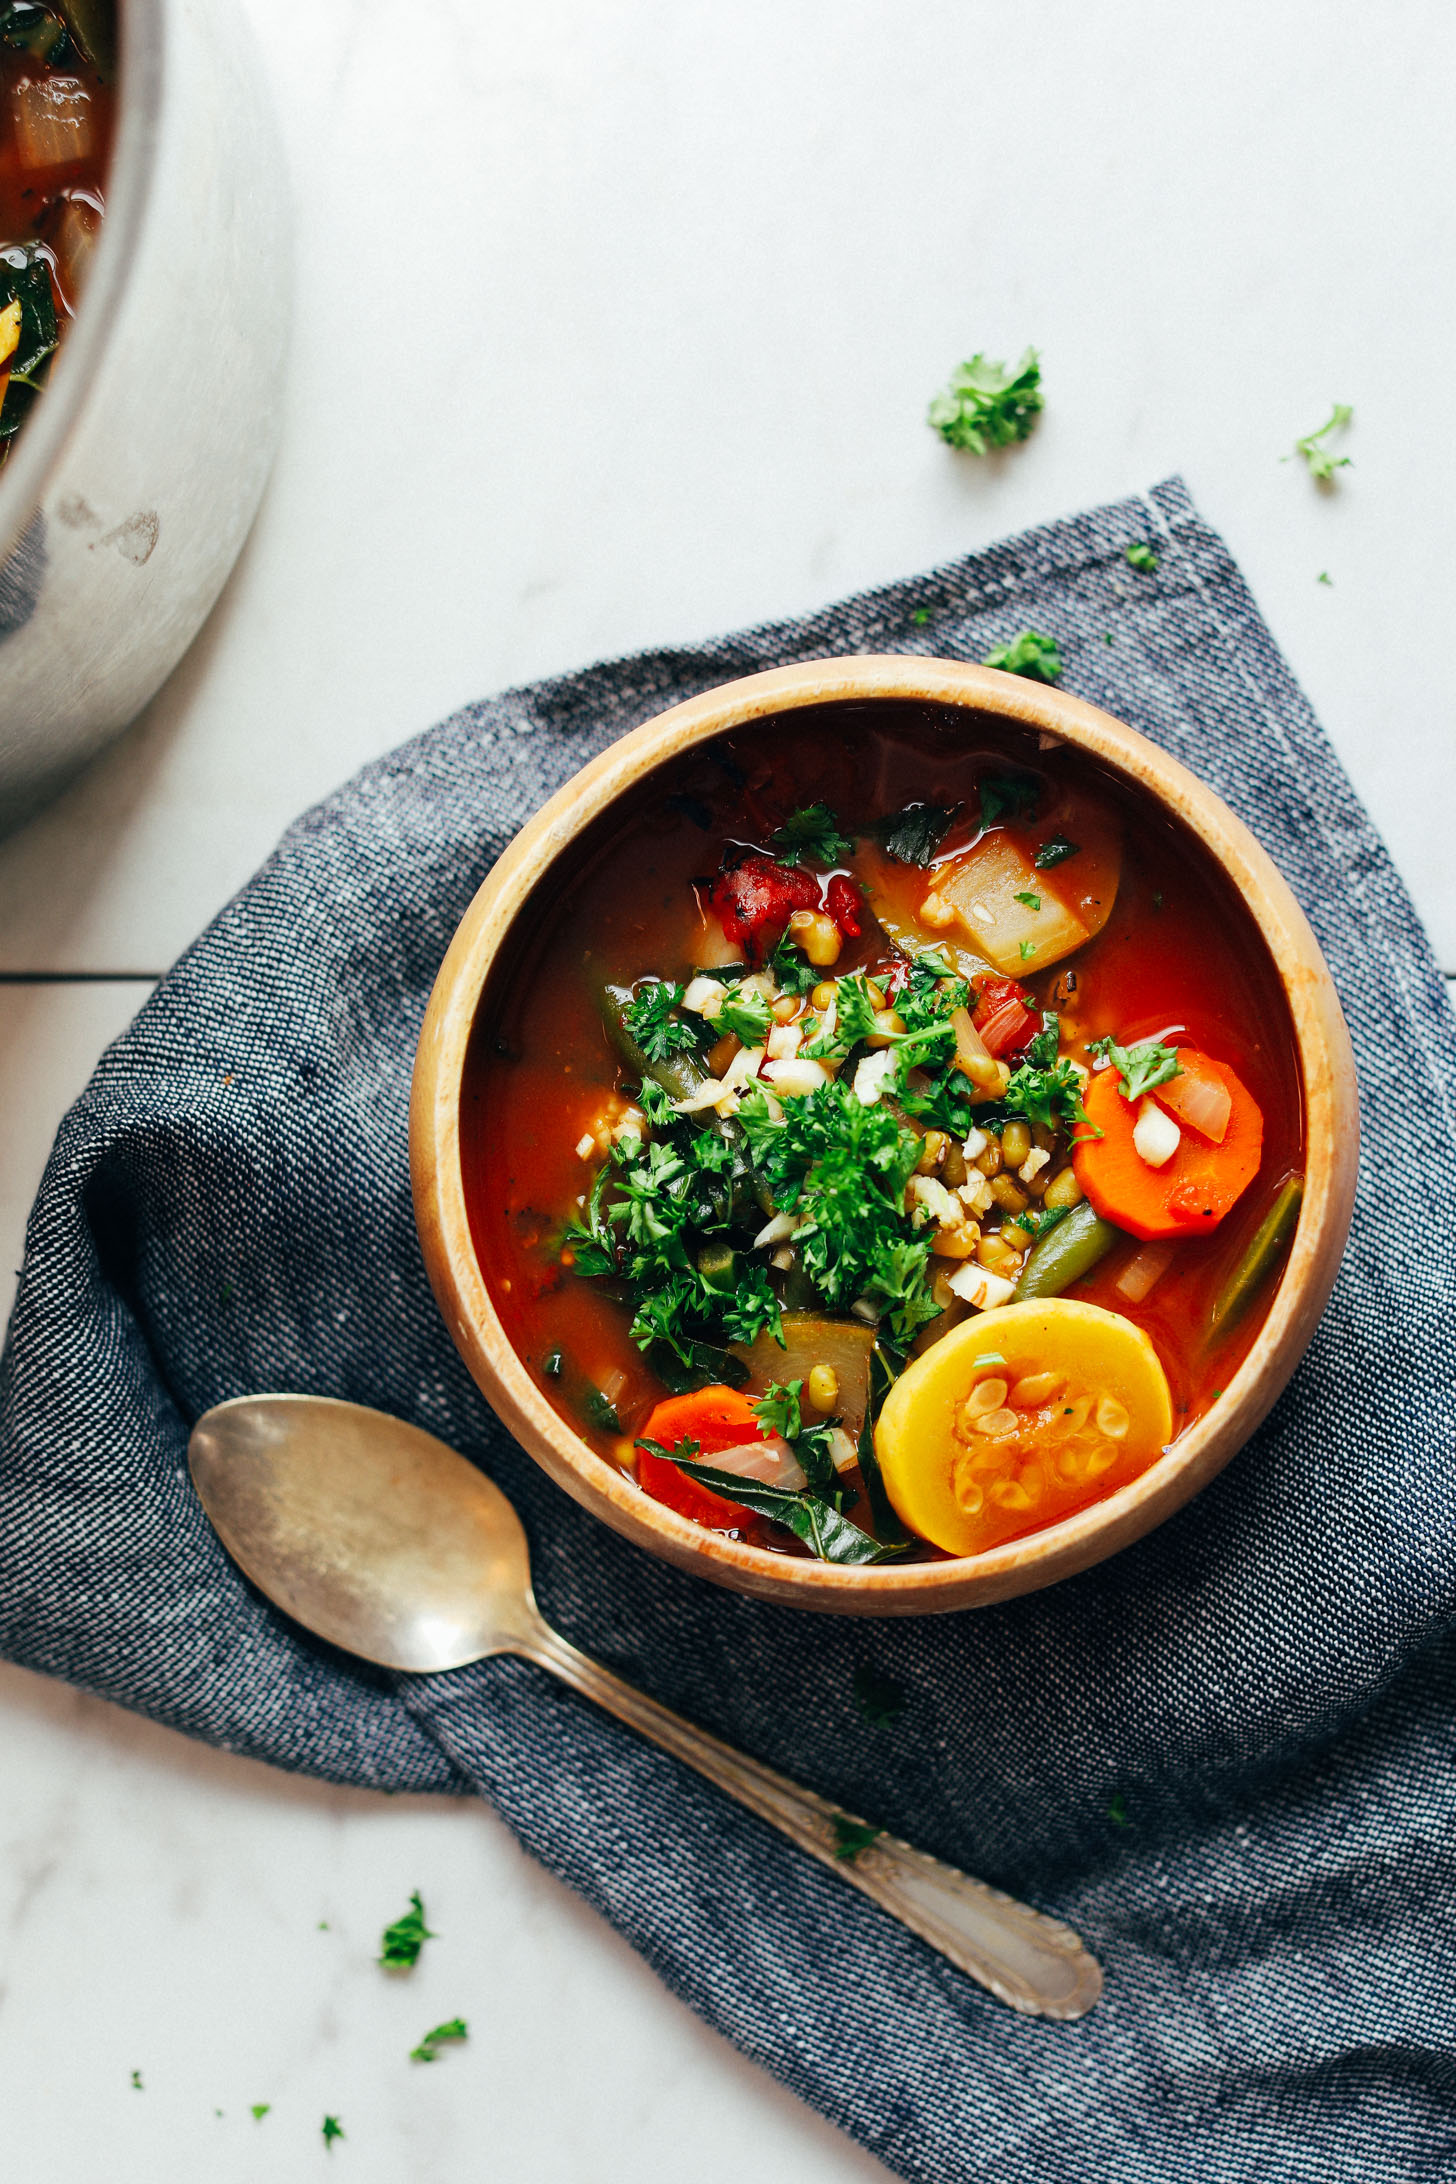 A single-serving bowl of our Fire-Roasted Tomato Veggie Mung Bean Soup garnished with fresh parsley